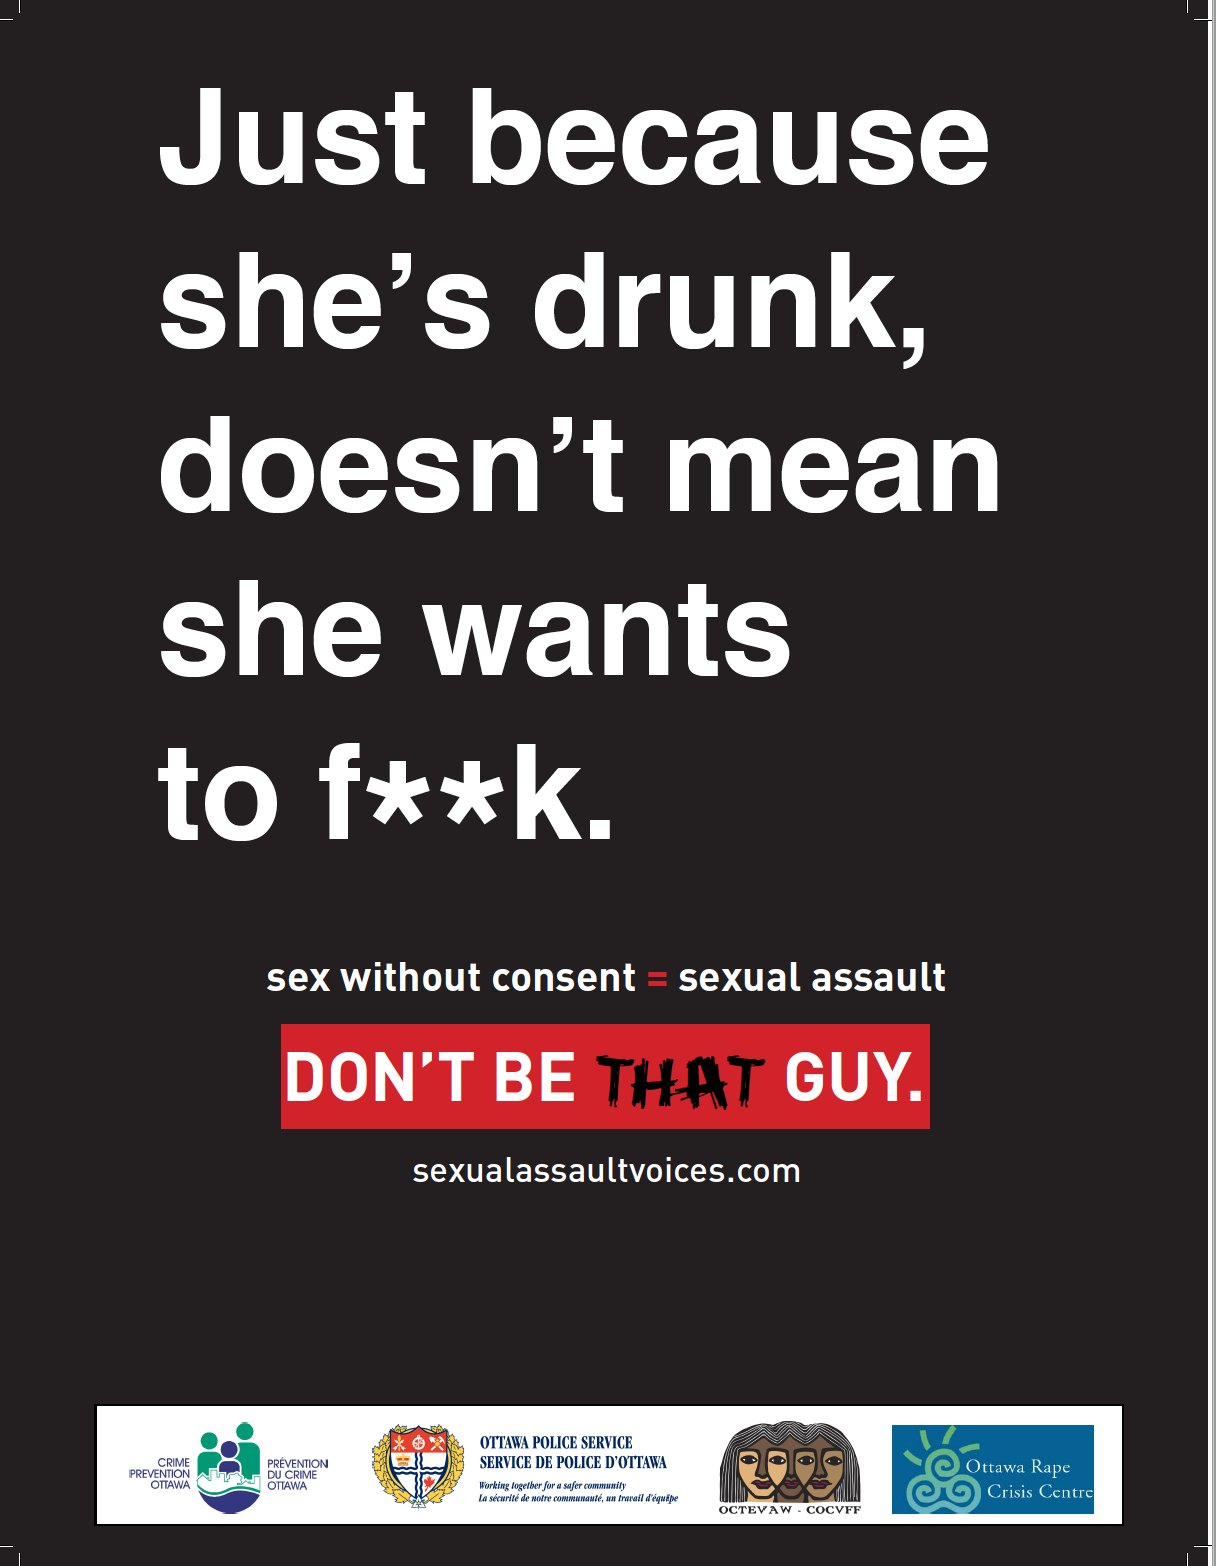 Just because she’s drunk, doesn’t mean she wants to f..k